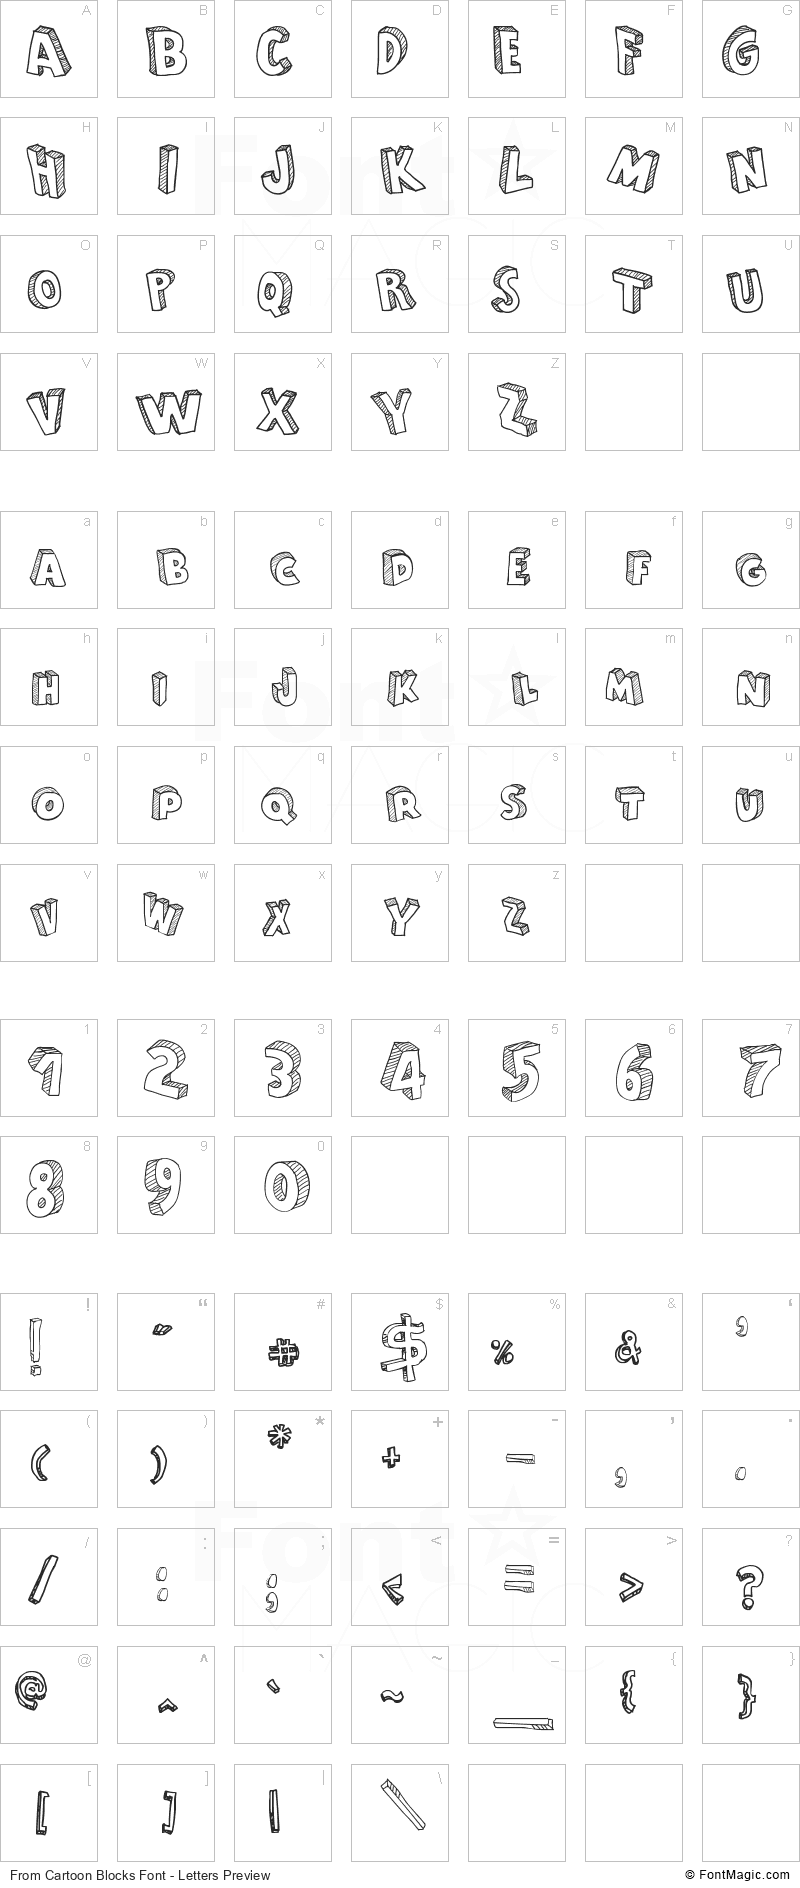 From Cartoon Blocks Font - All Latters Preview Chart